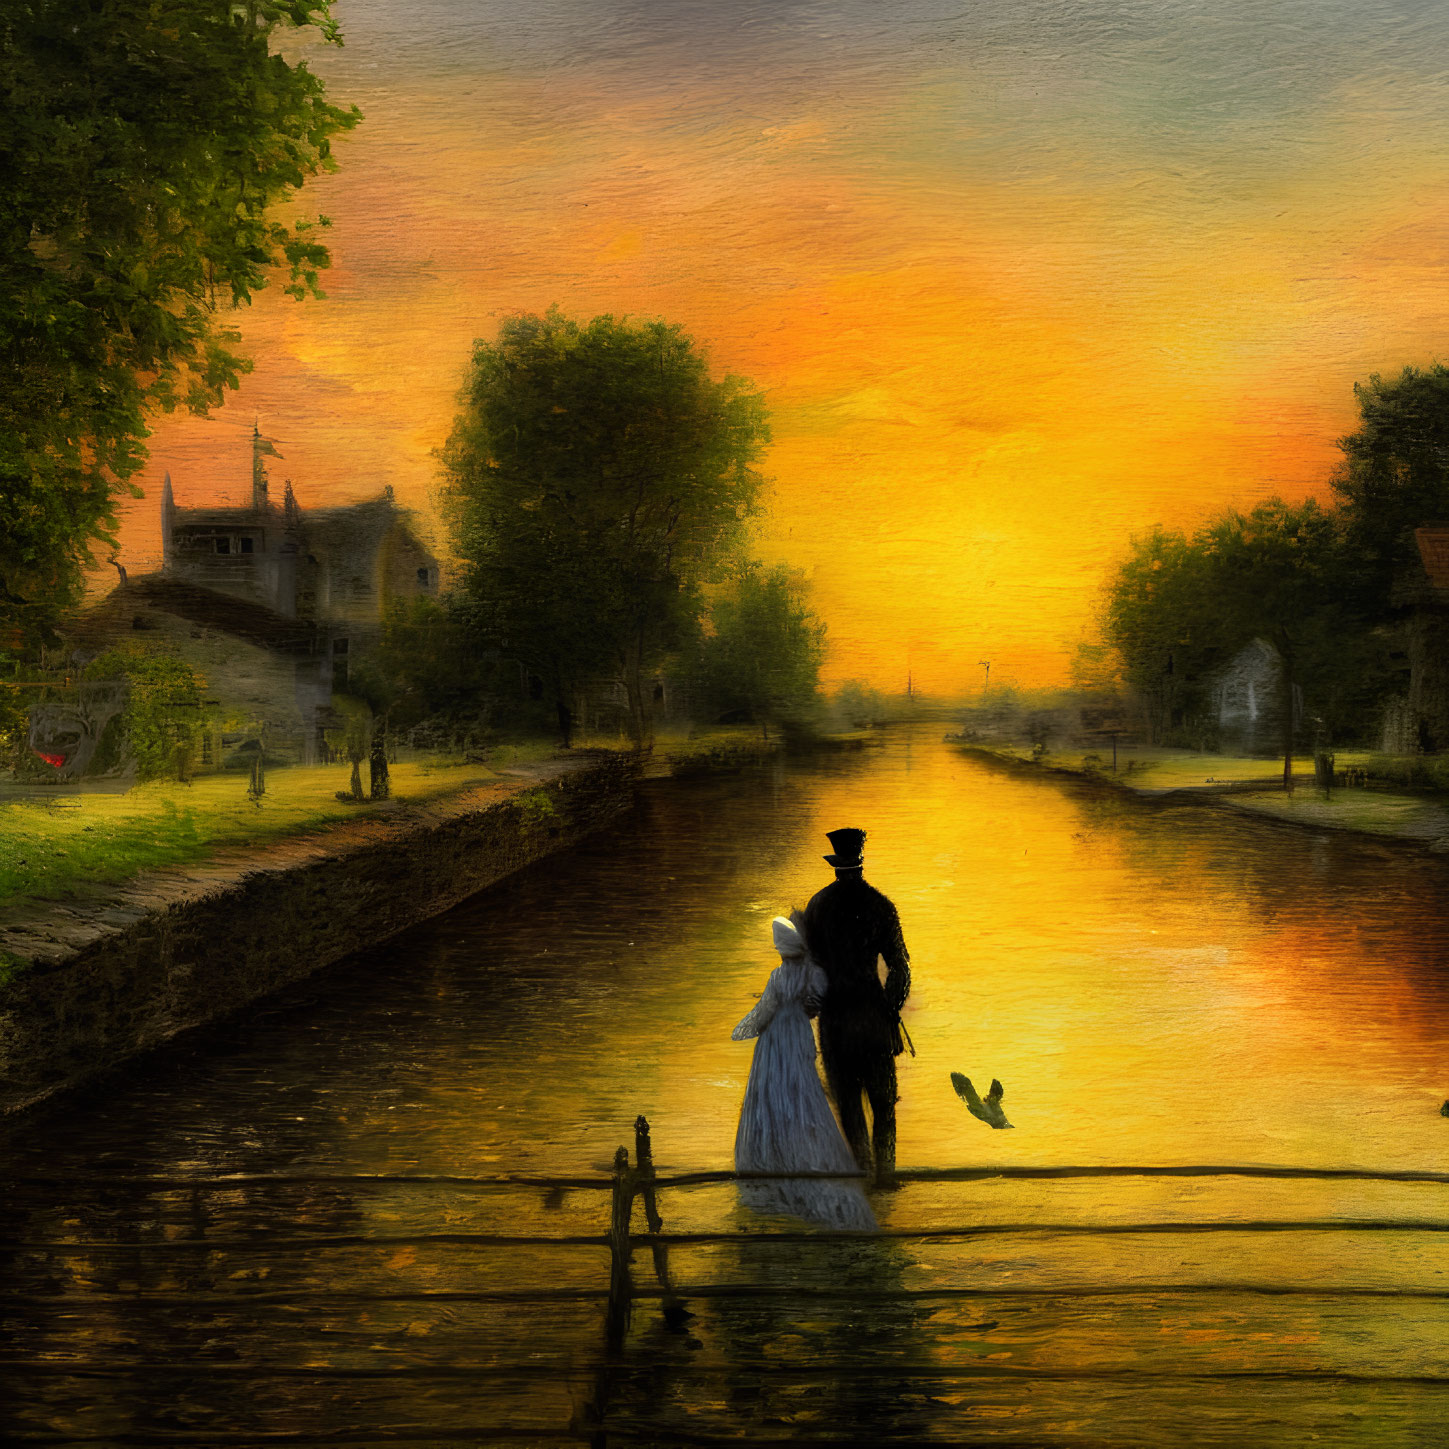 Victorian couple on wooden dock at sunset in picturesque village